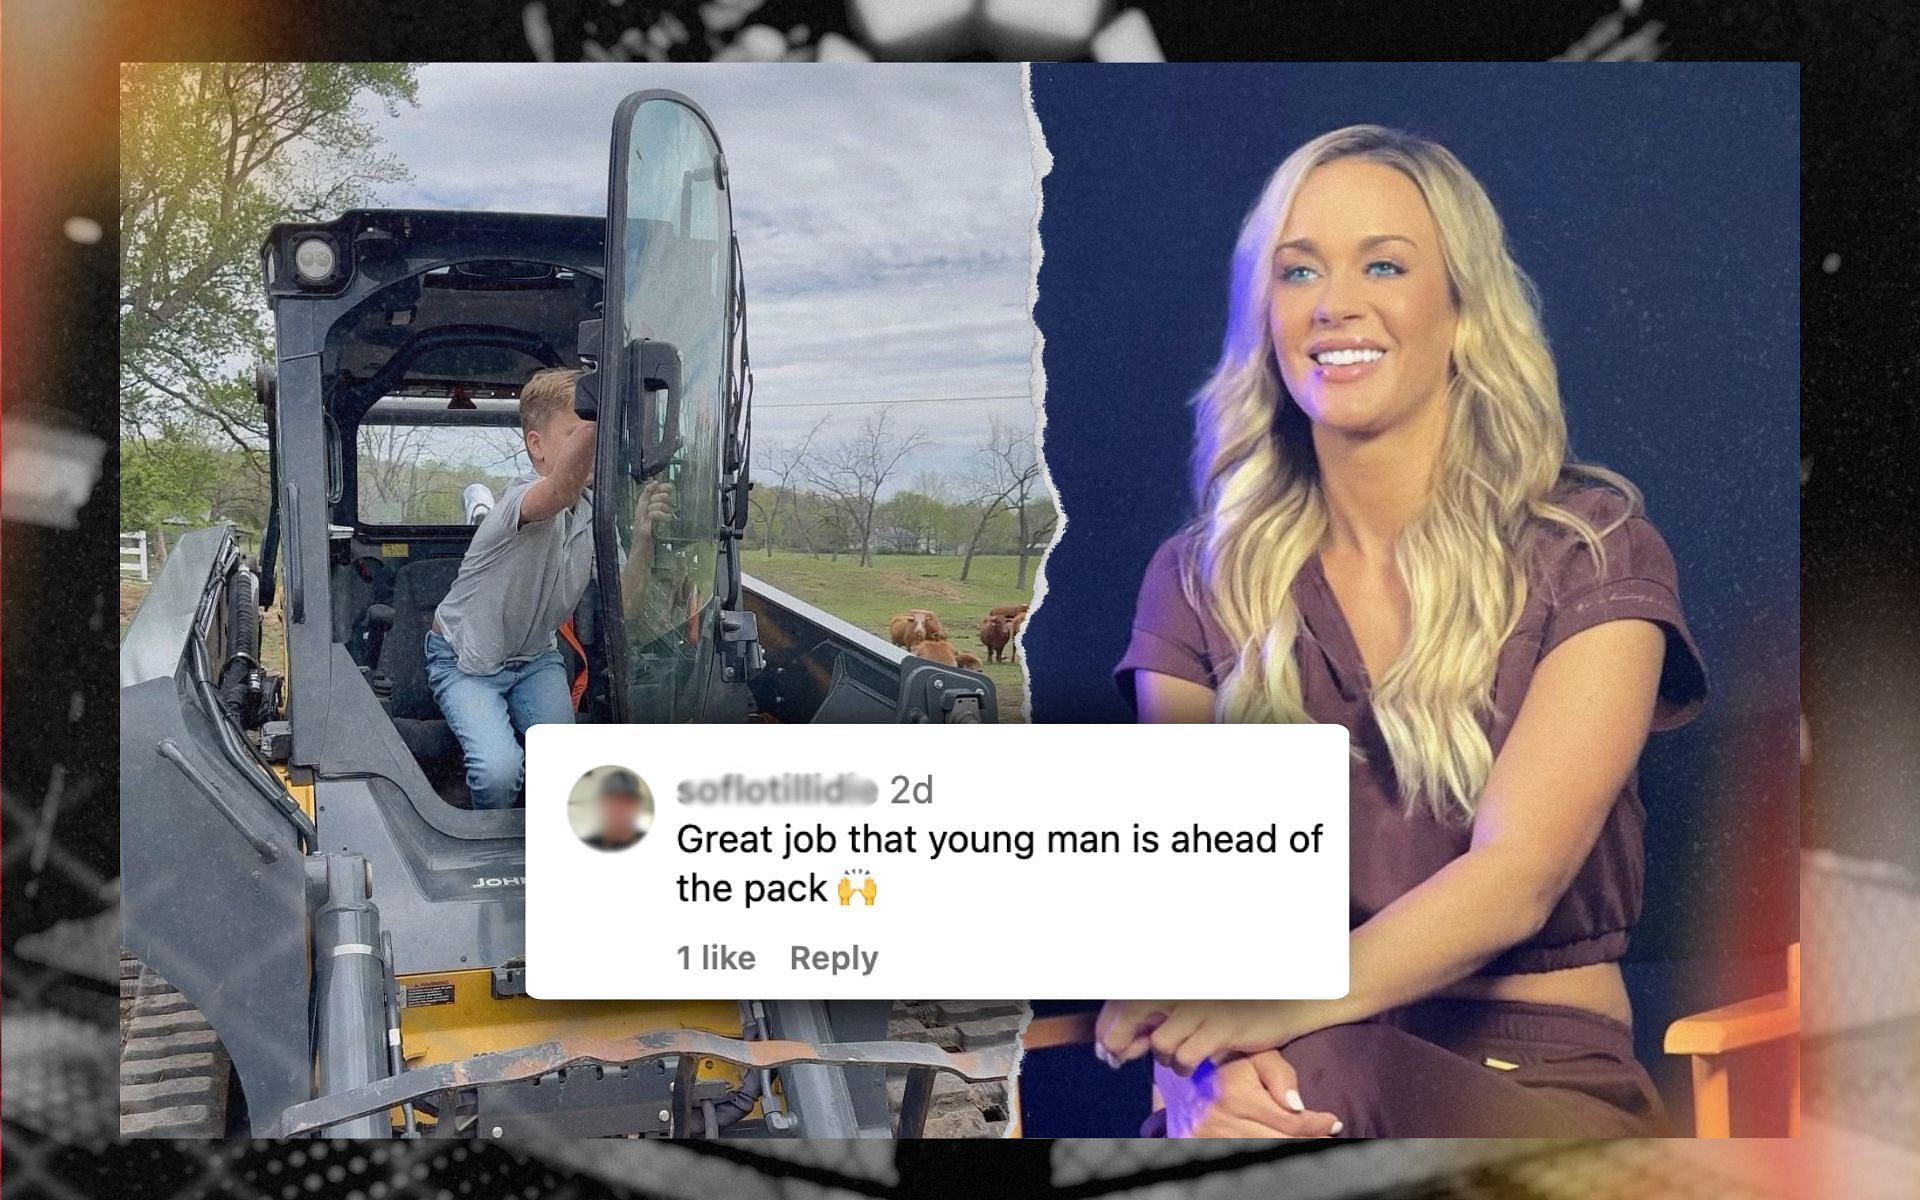 Fans react to latest post from Laura Sanko. [Image courtesy: @laura_sanko on Instagram]